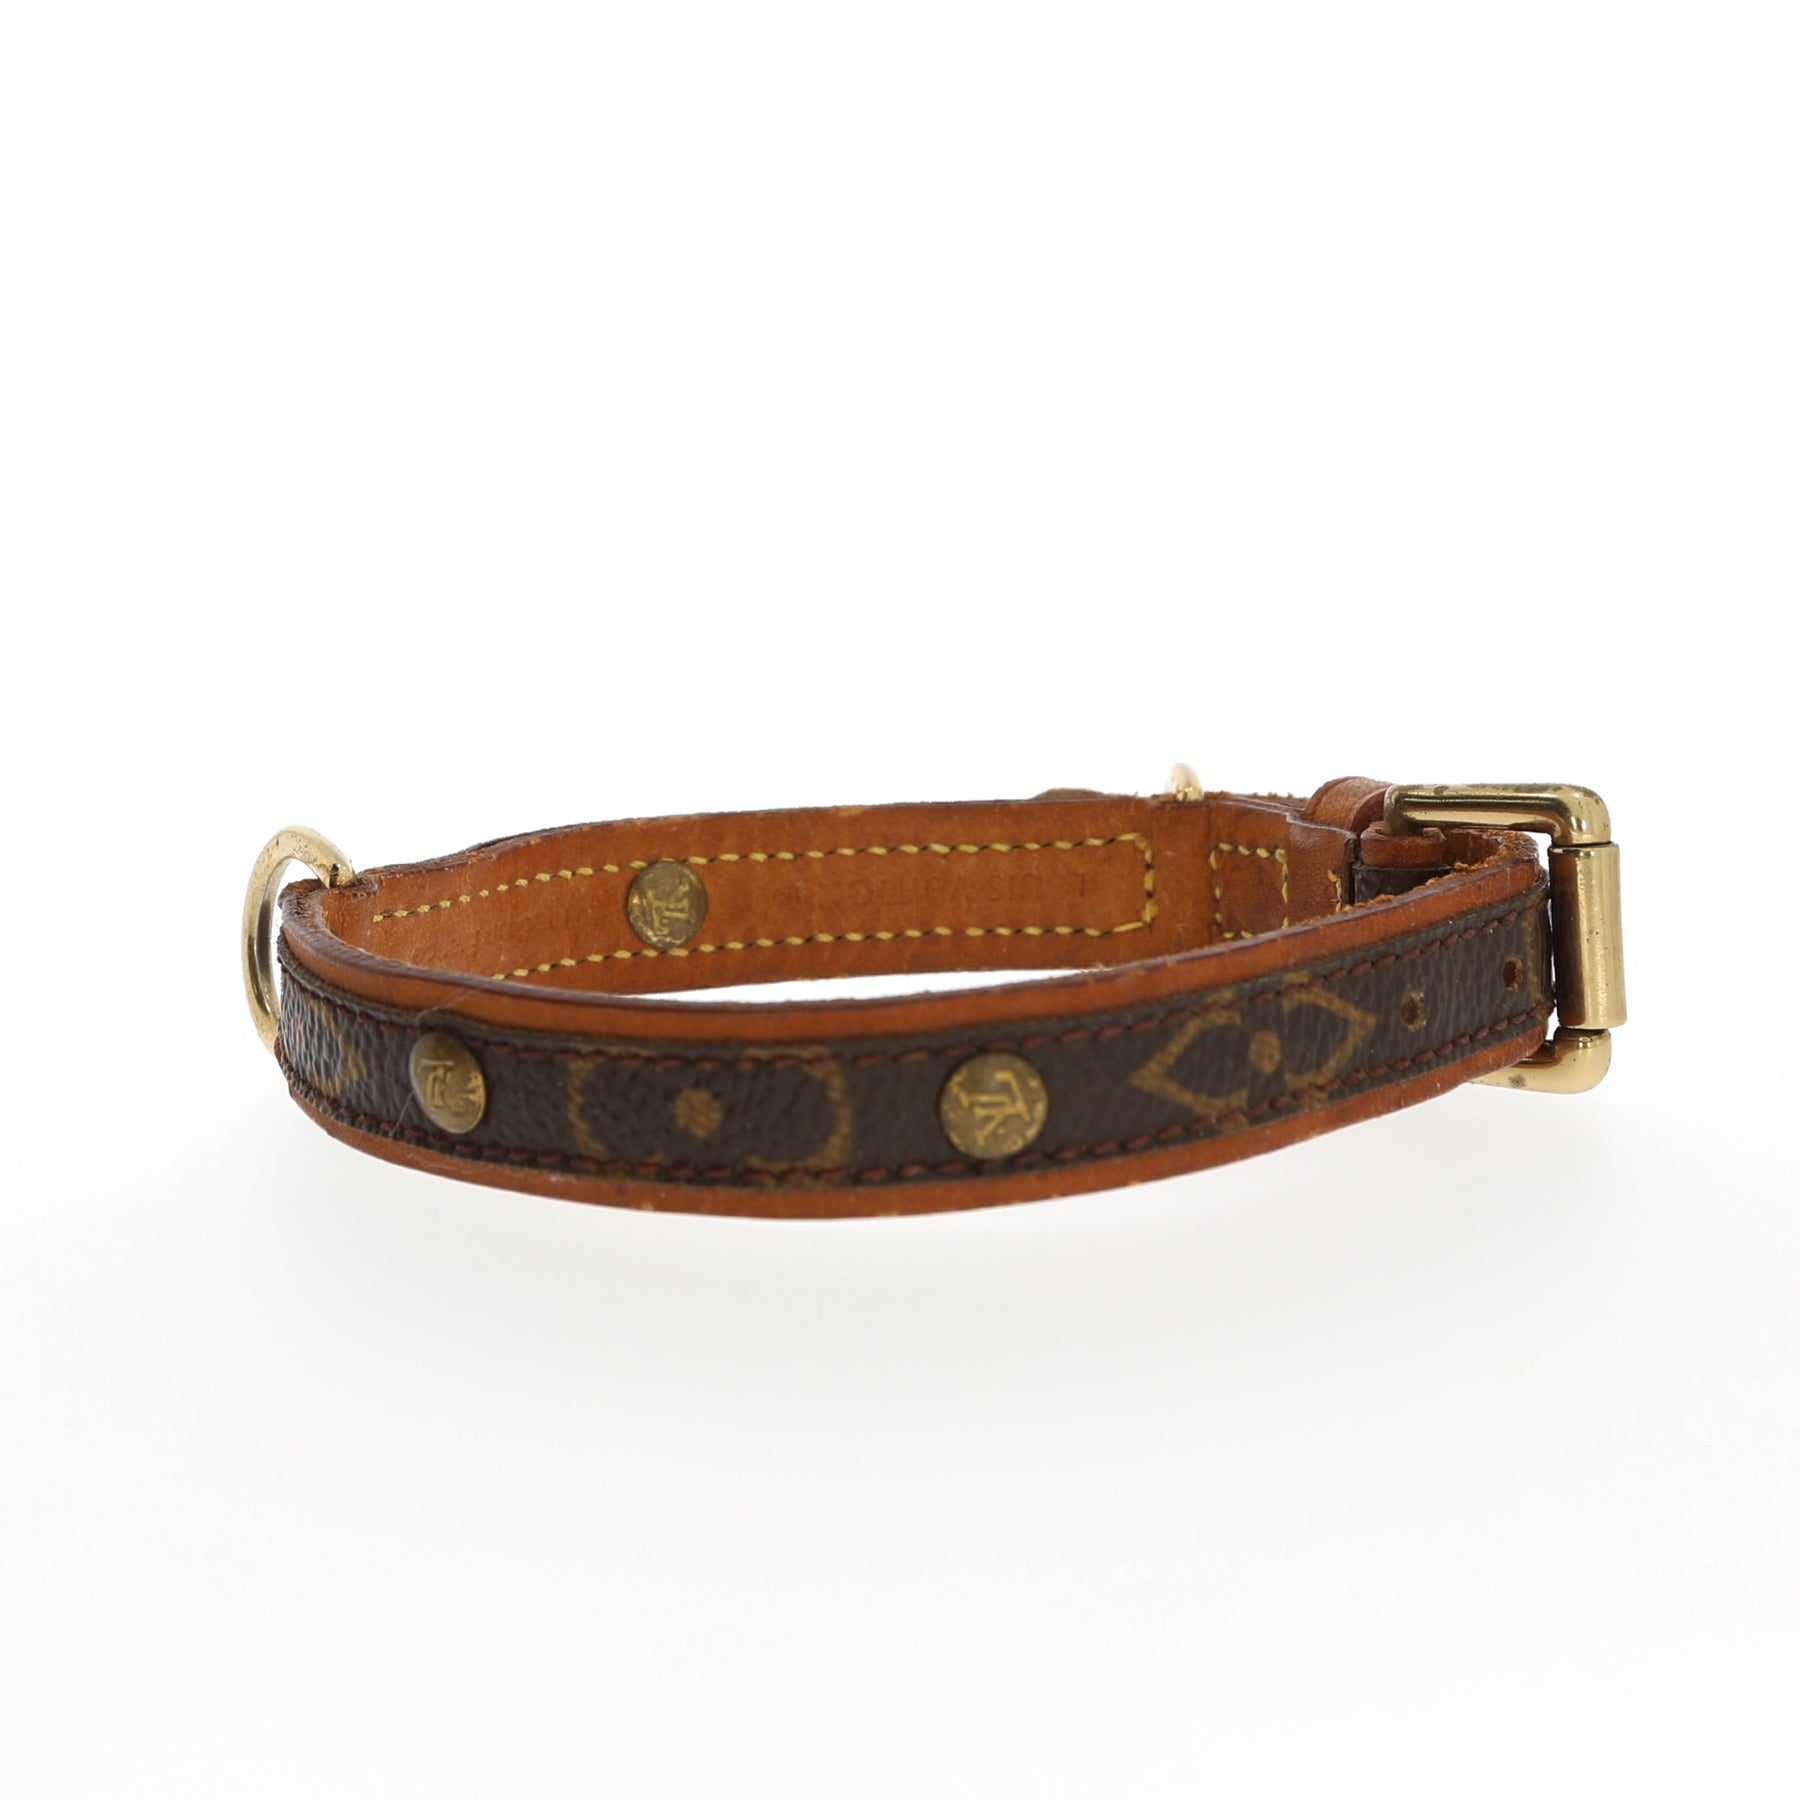 Authentic Louis Vuitton dog collar from japan